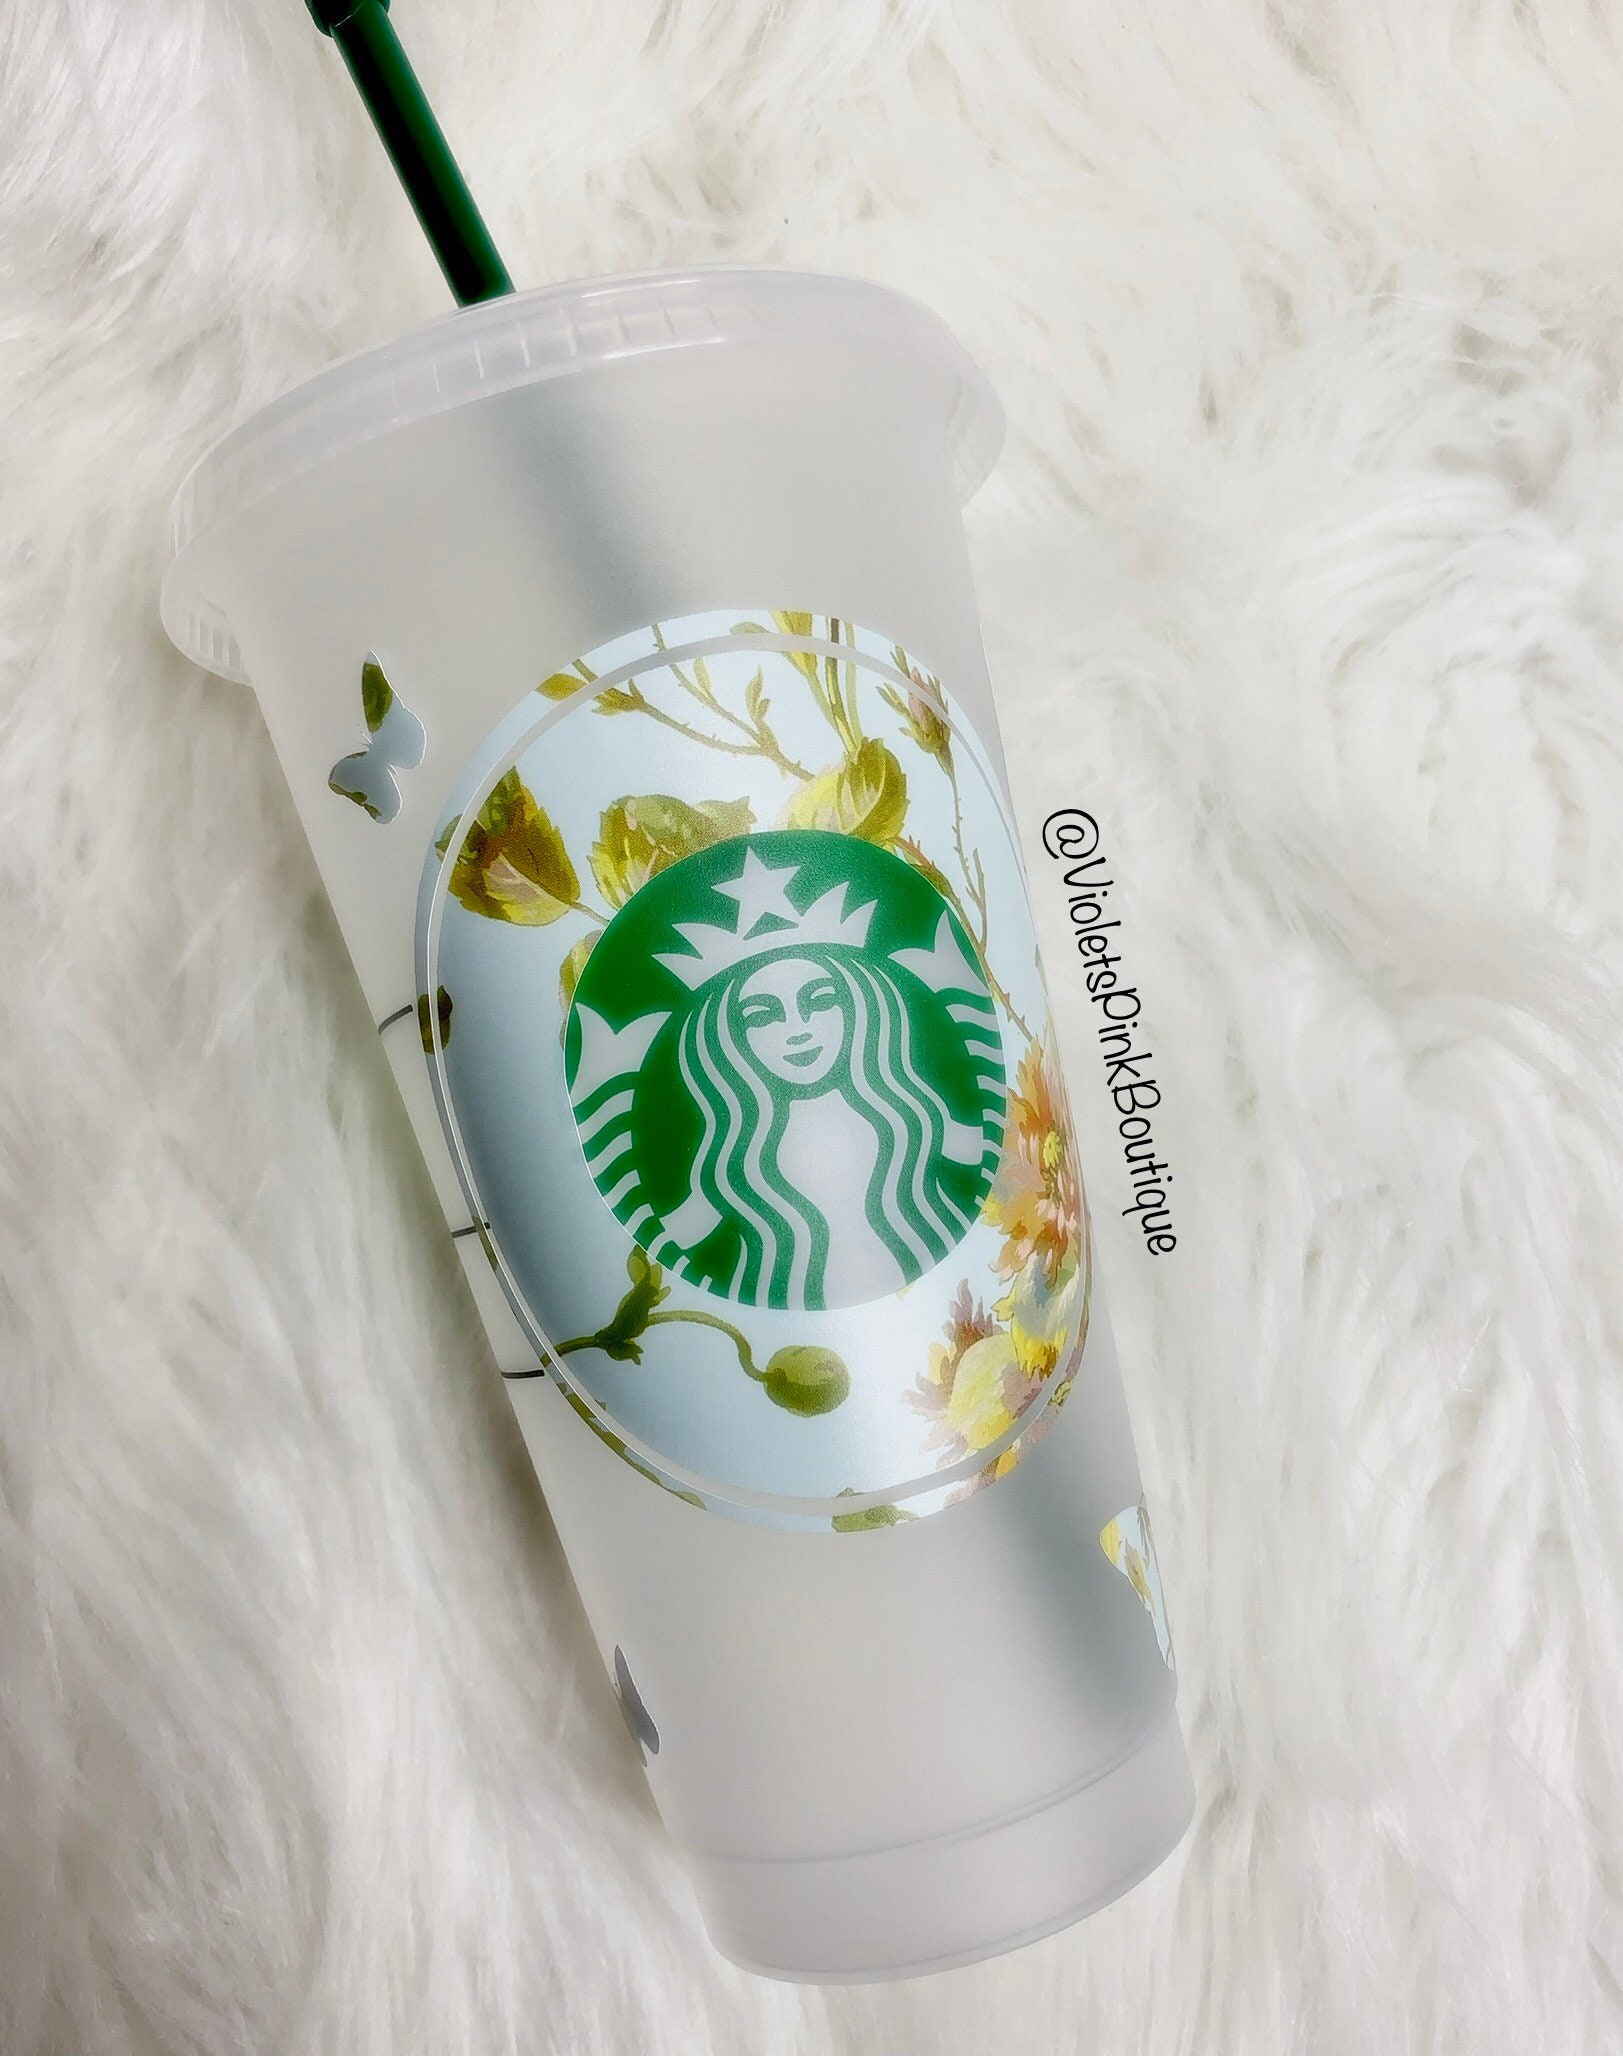 Butterfly Floral Print STARBUCKS Tumbler reusable Cold Cup Custom Starbucks  Cup- Gift Ideas